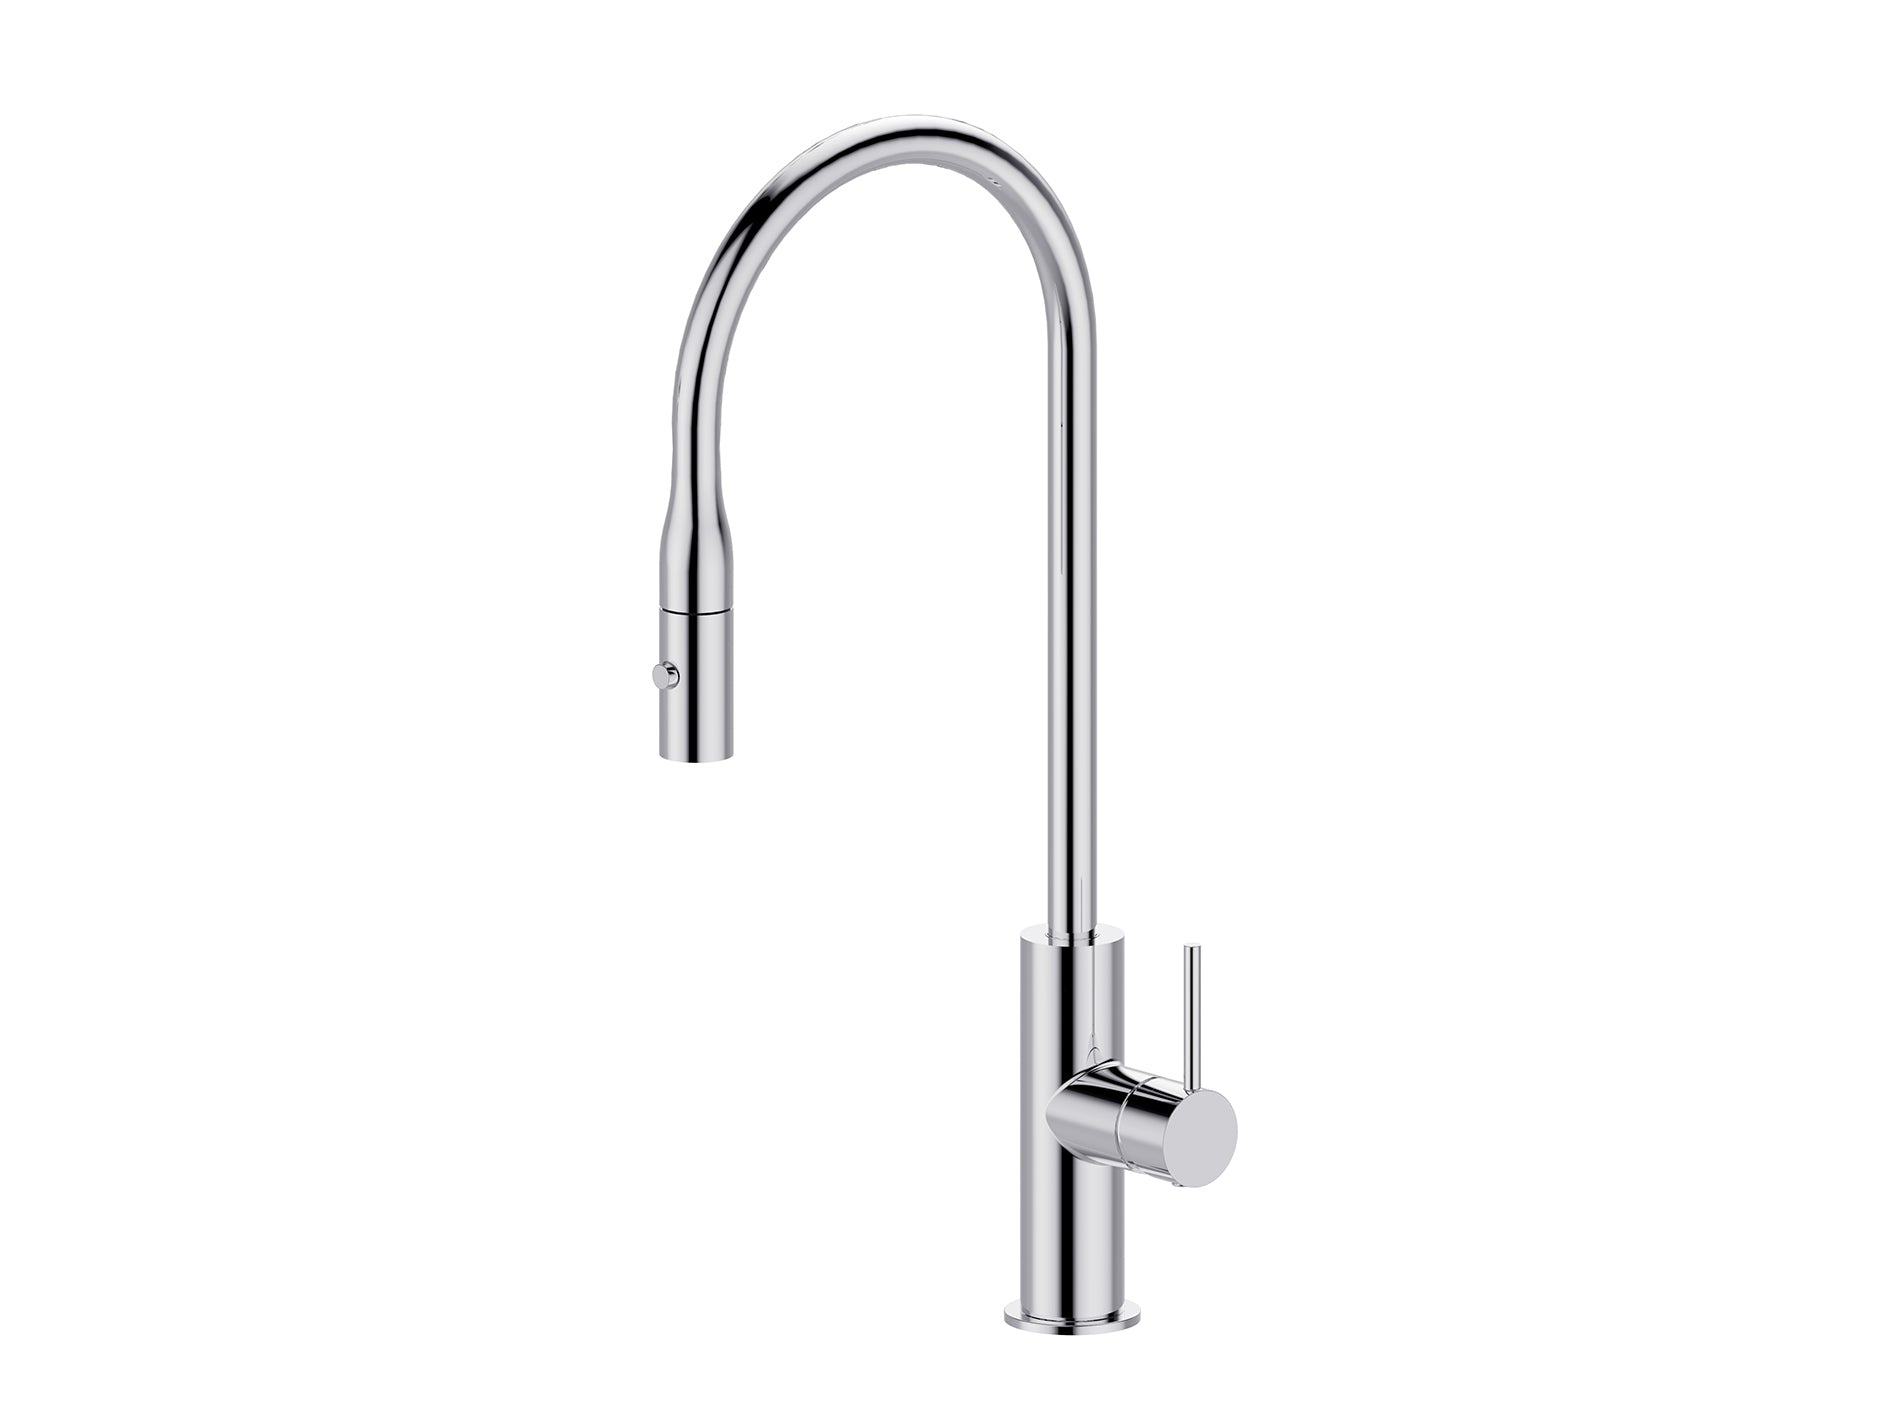 Lushh Bluebell Gooseneck Pullout Sink Mixer with Vegie Spray LS-BB-POSMV